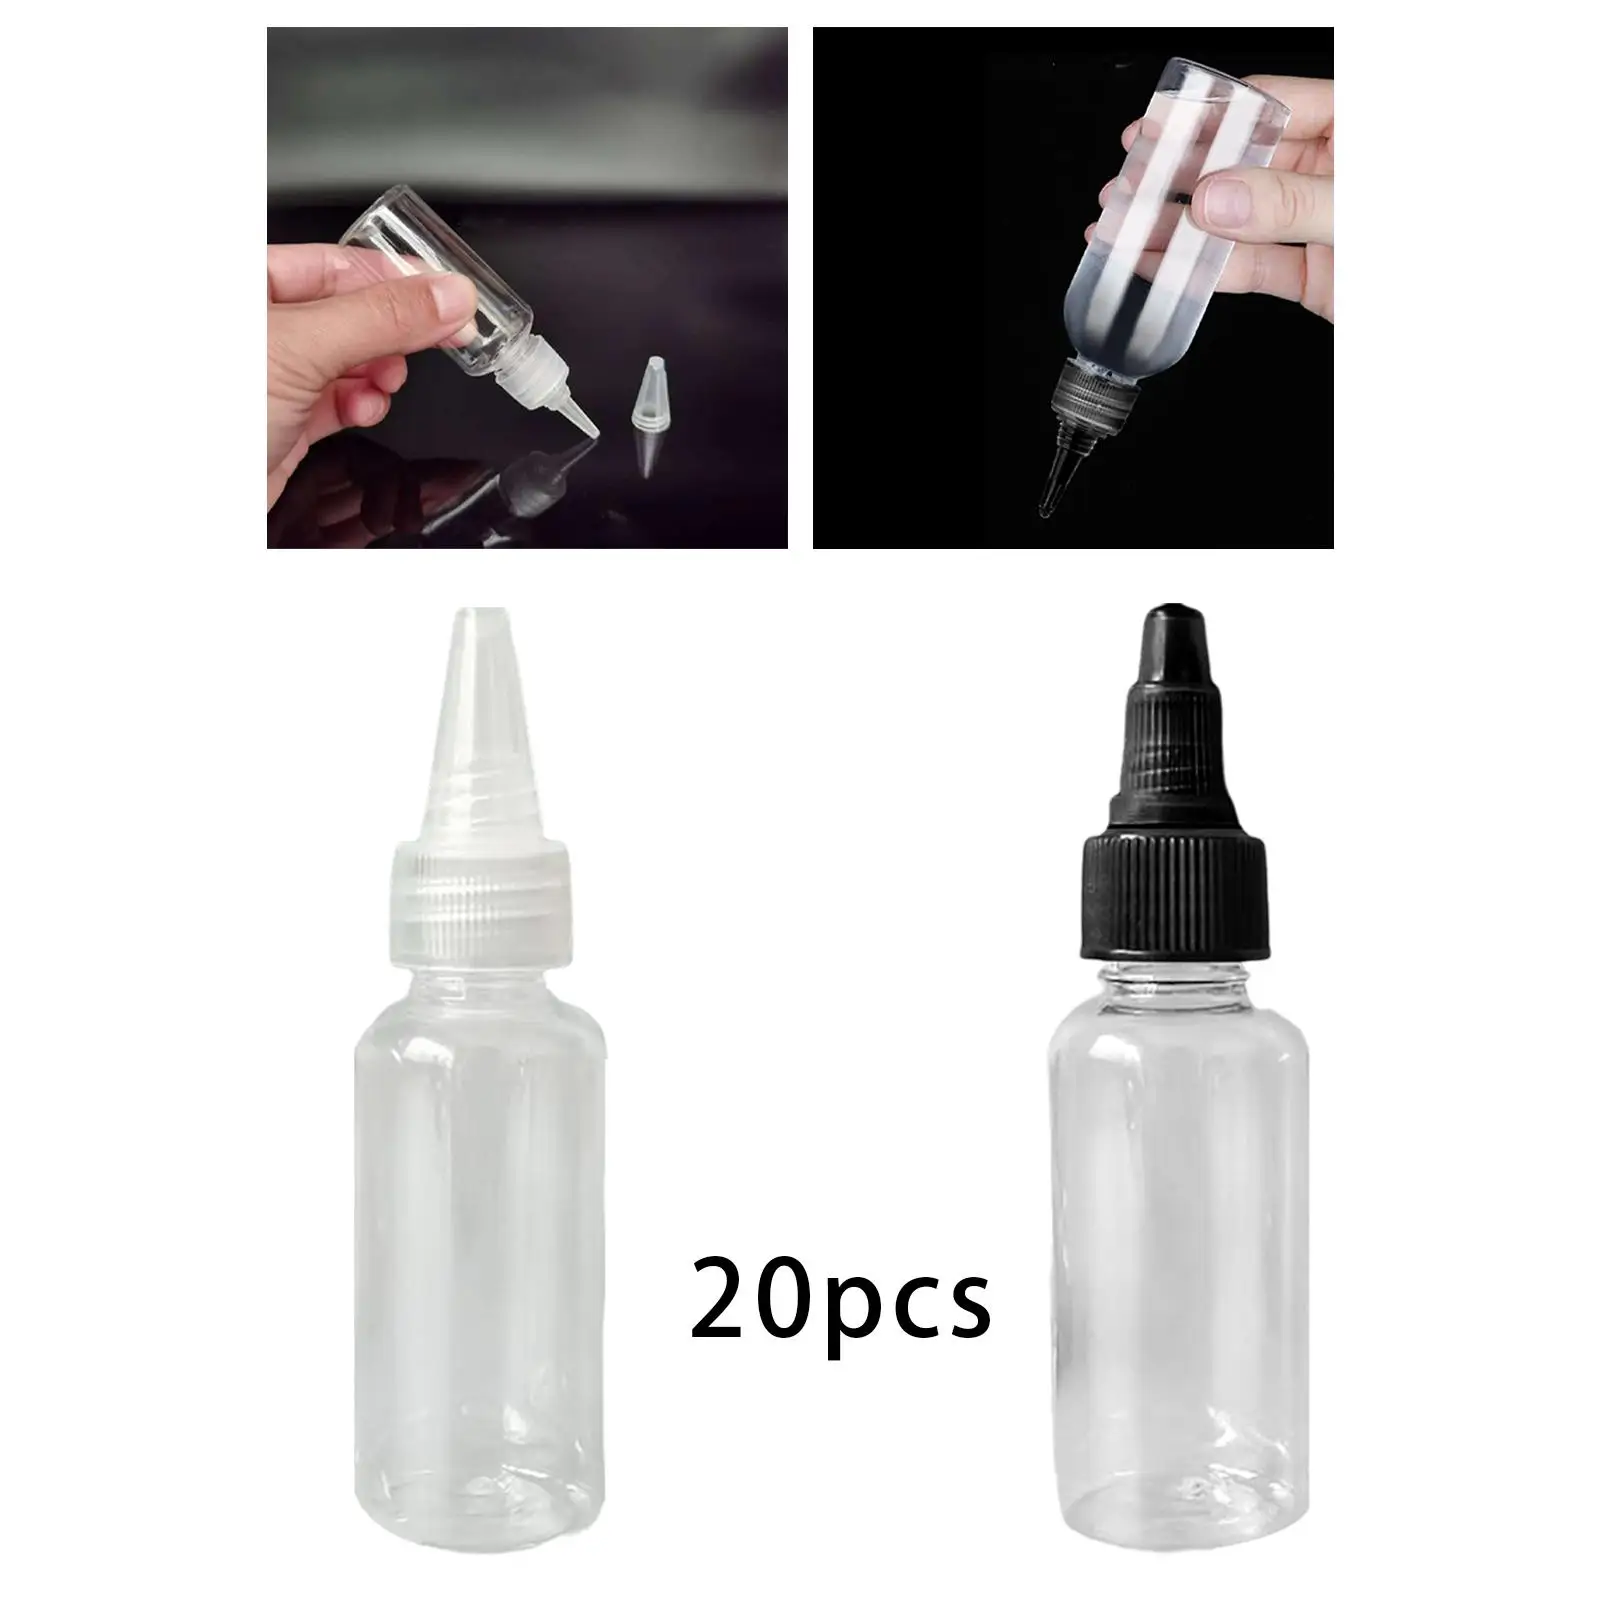 20Pcs Water Bottles Set 30ml with Twist Caps Dispenser Sharp Mouth Pointed Containers for Makeup Glue 